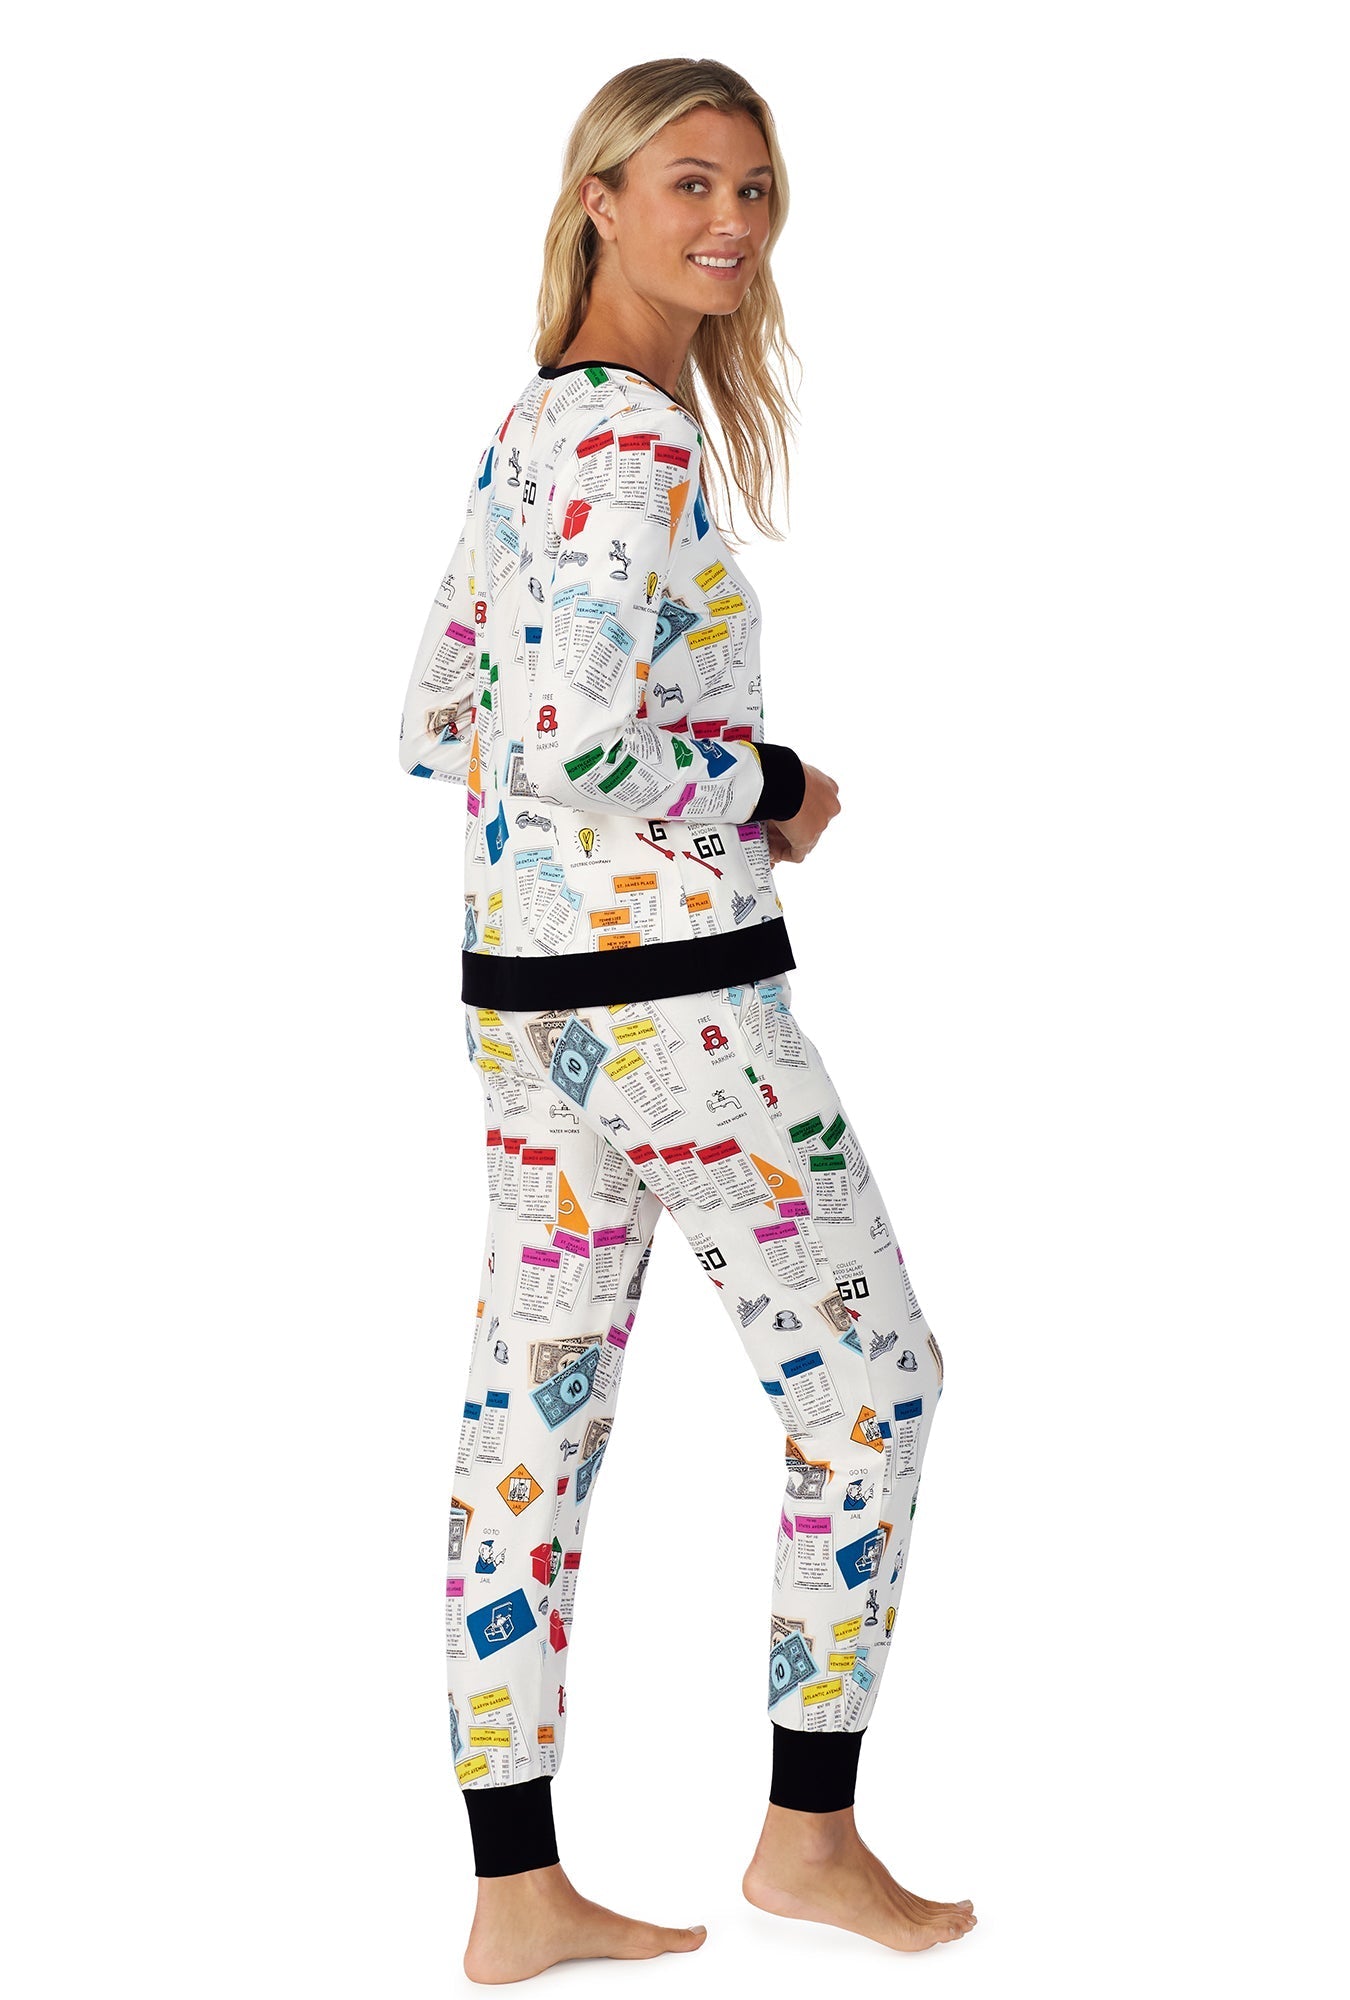 A lady wearing a long sleeve pullover pj set with monopoly pattern.